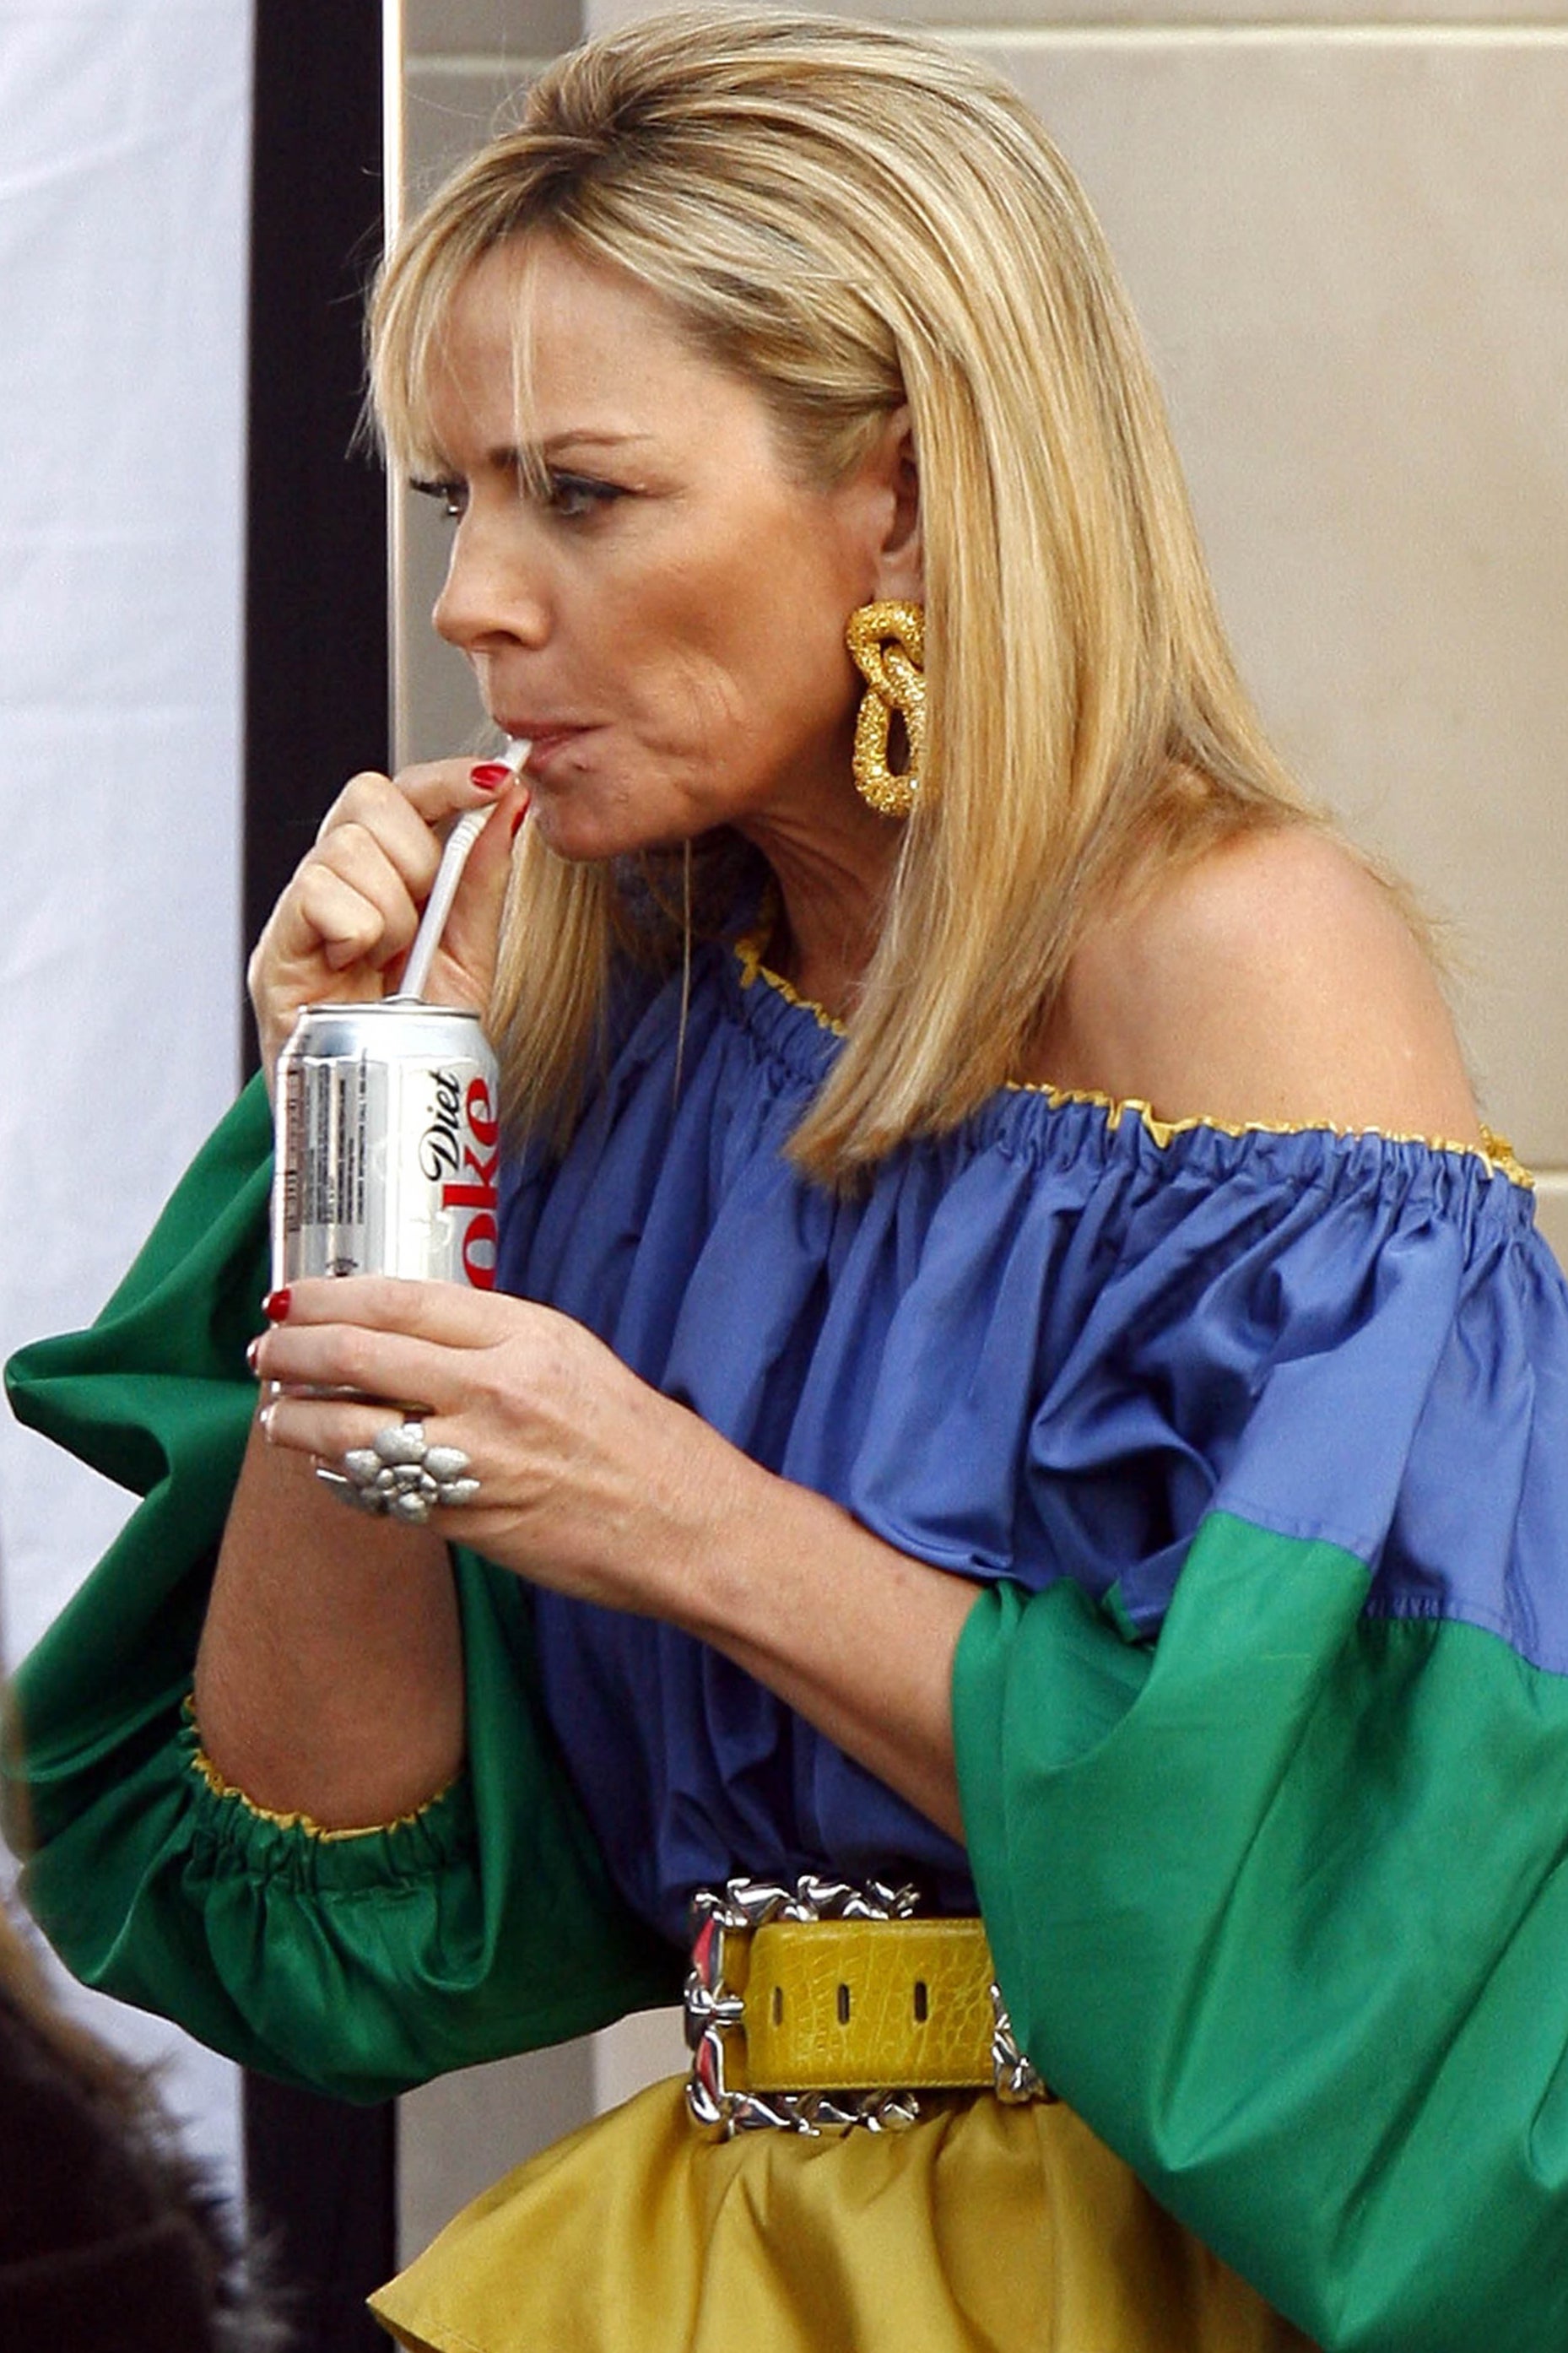 Kim Cattrall sips from a Diet Coke on the set of the ‘Sex and the City’ movie in 2007